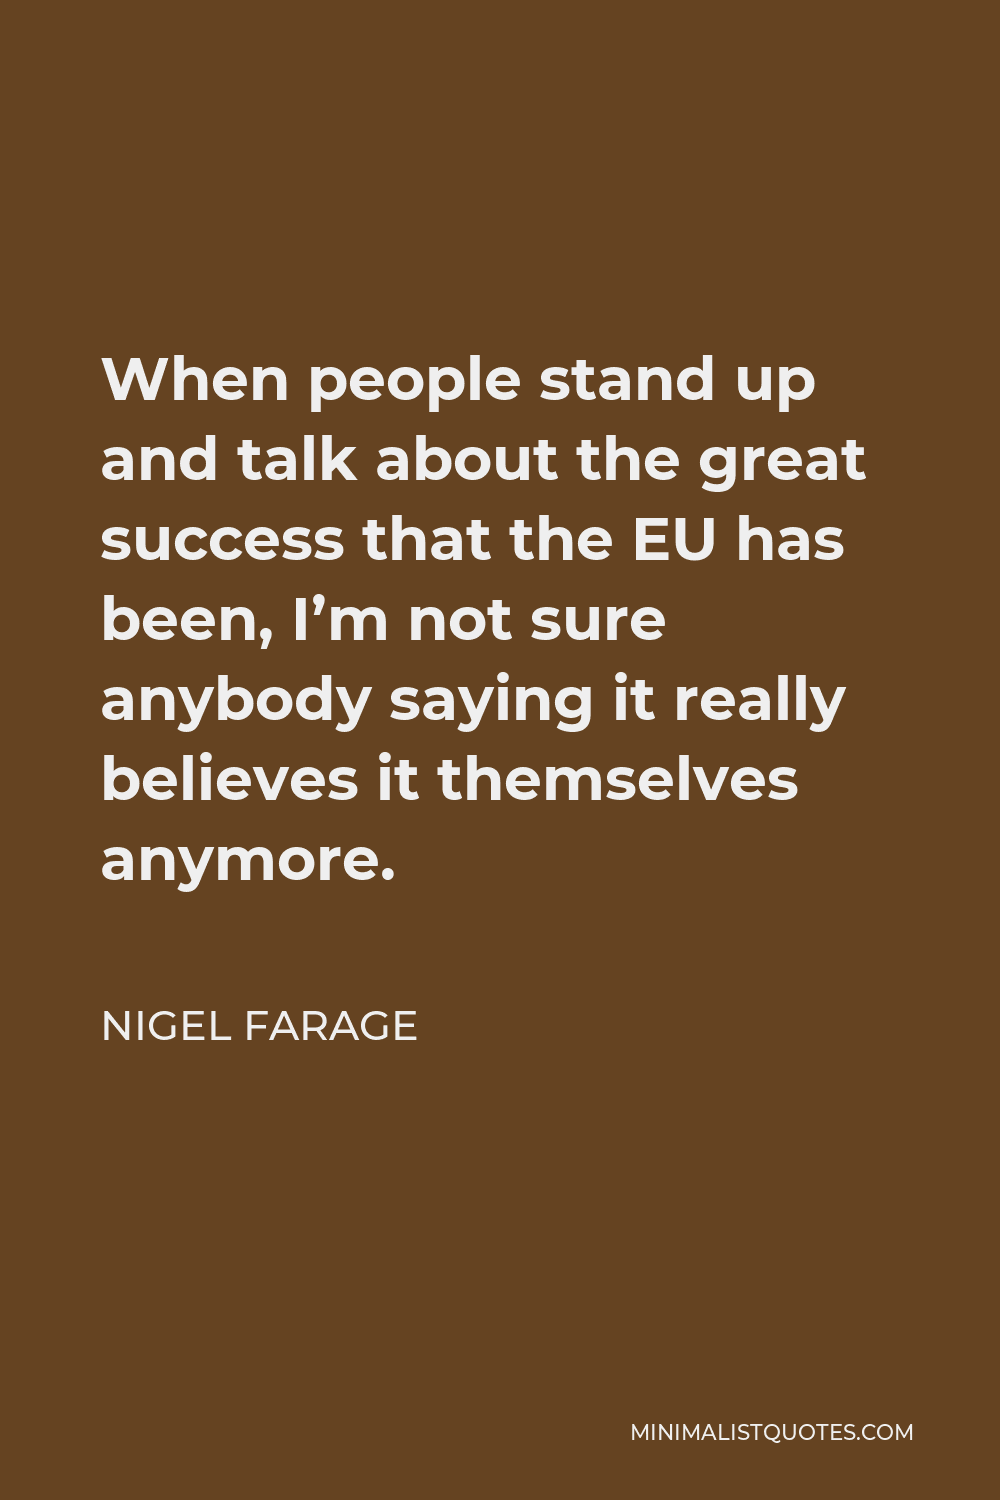 Nigel Farage Quote - When people stand up and talk about the great success that the EU has been, I’m not sure anybody saying it really believes it themselves anymore.